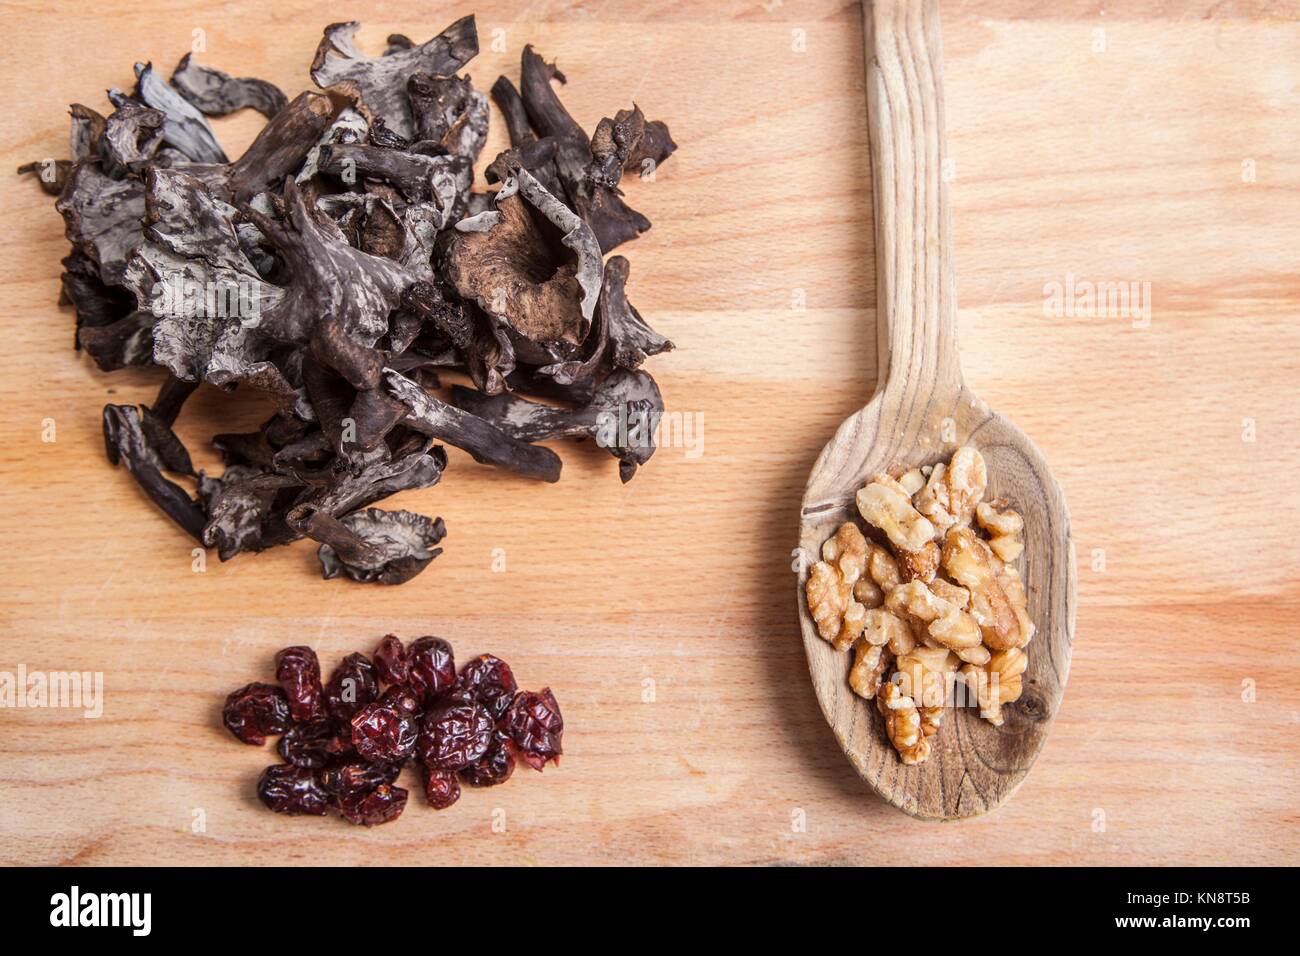 Horn of Plenty mushrooms. over chopping board with wooden spoon full of walnut and blueberry. Stock Photo